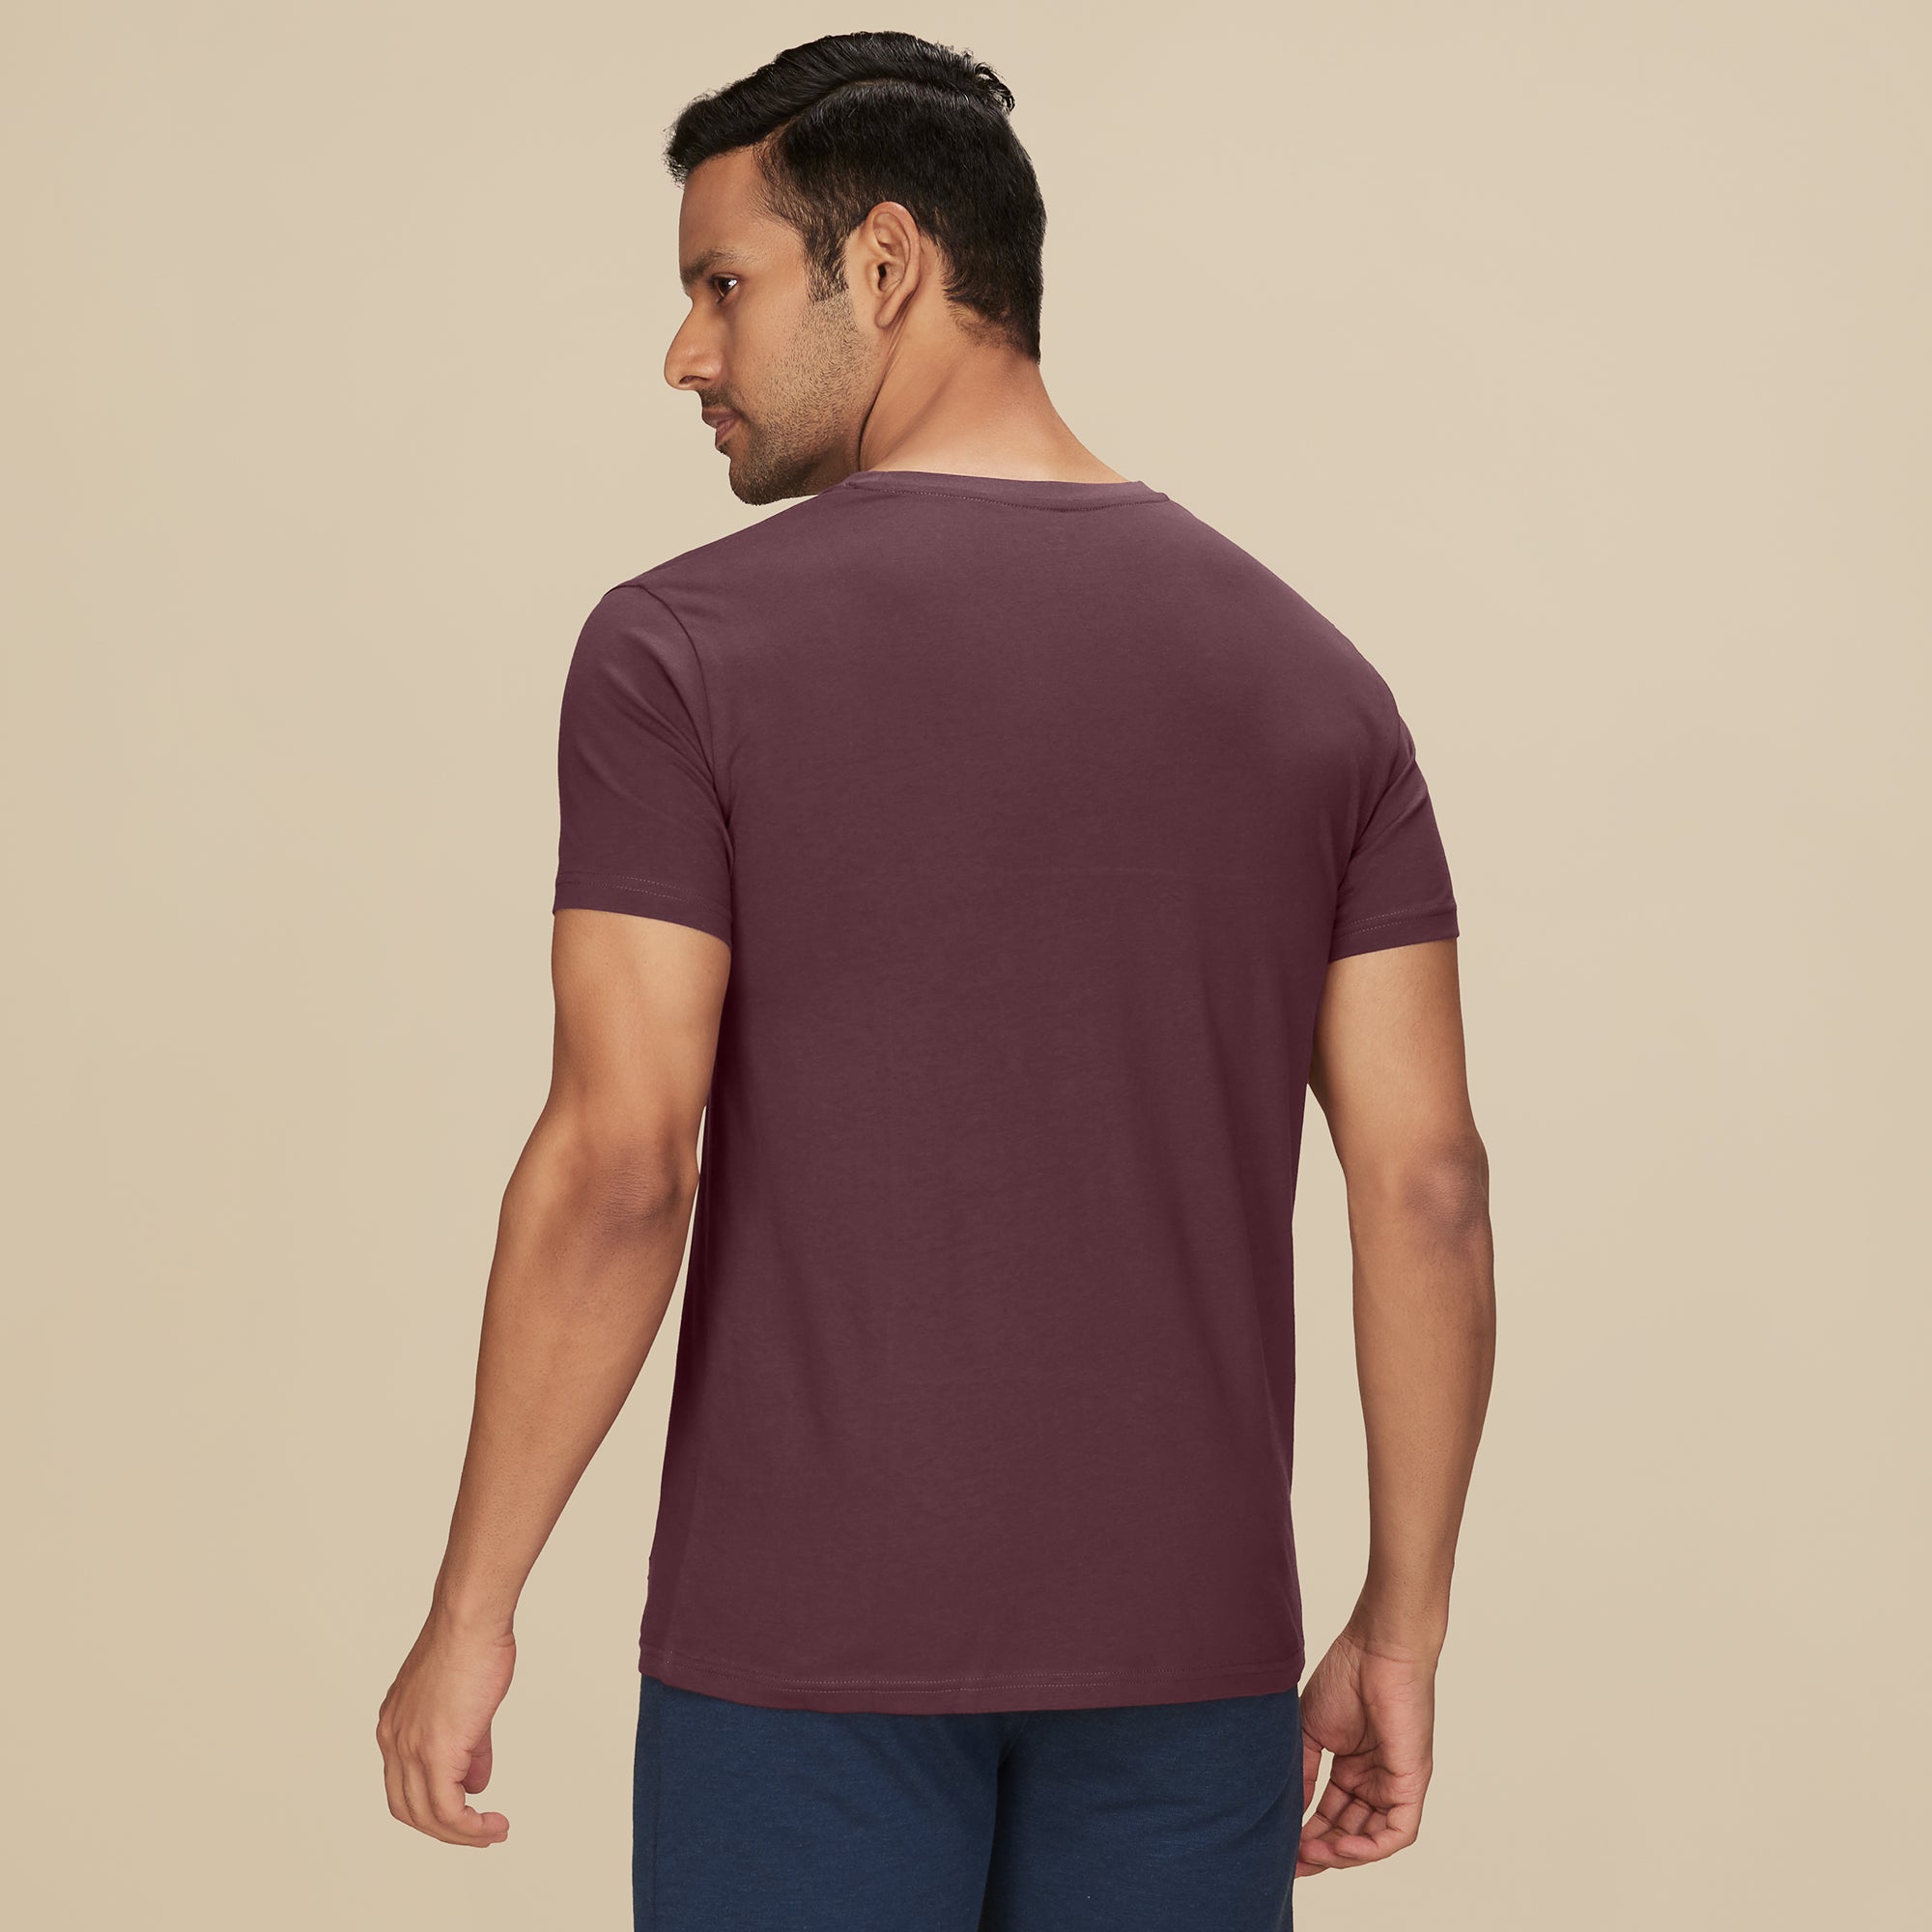 Pace Combed Cotton T-shirt for men Merlot Maroon - XYXX Mens Apparels